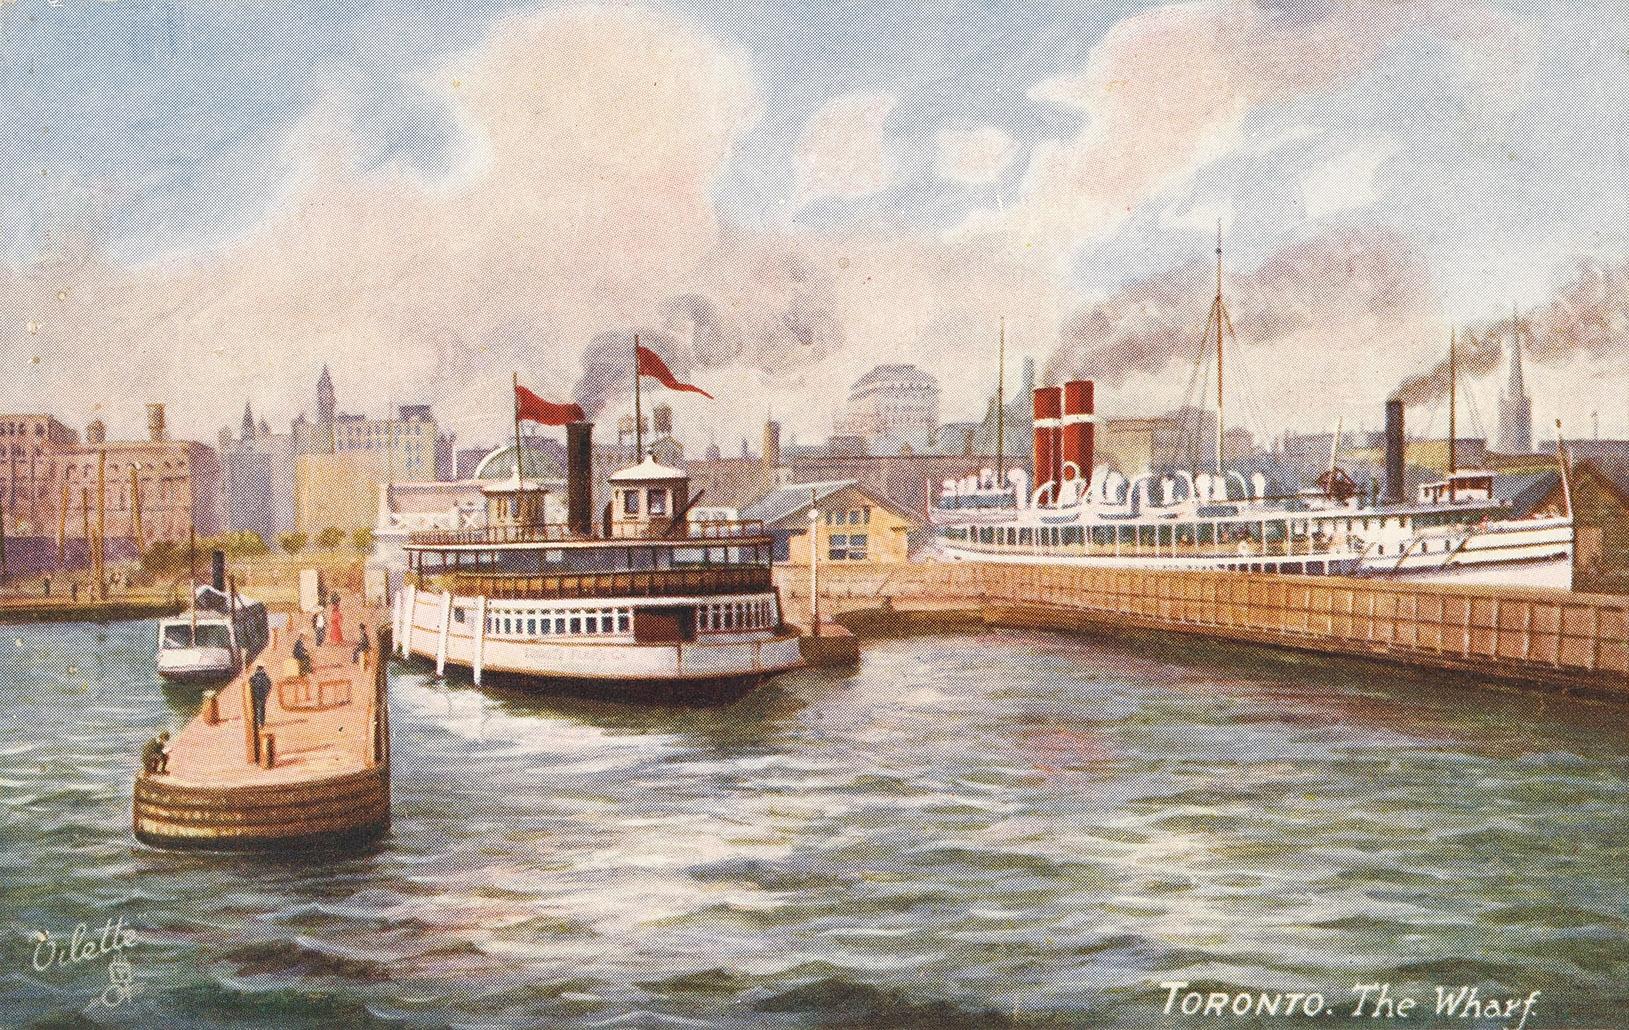 Image shows a few boats on the lake with some Harbour buildings in the background.